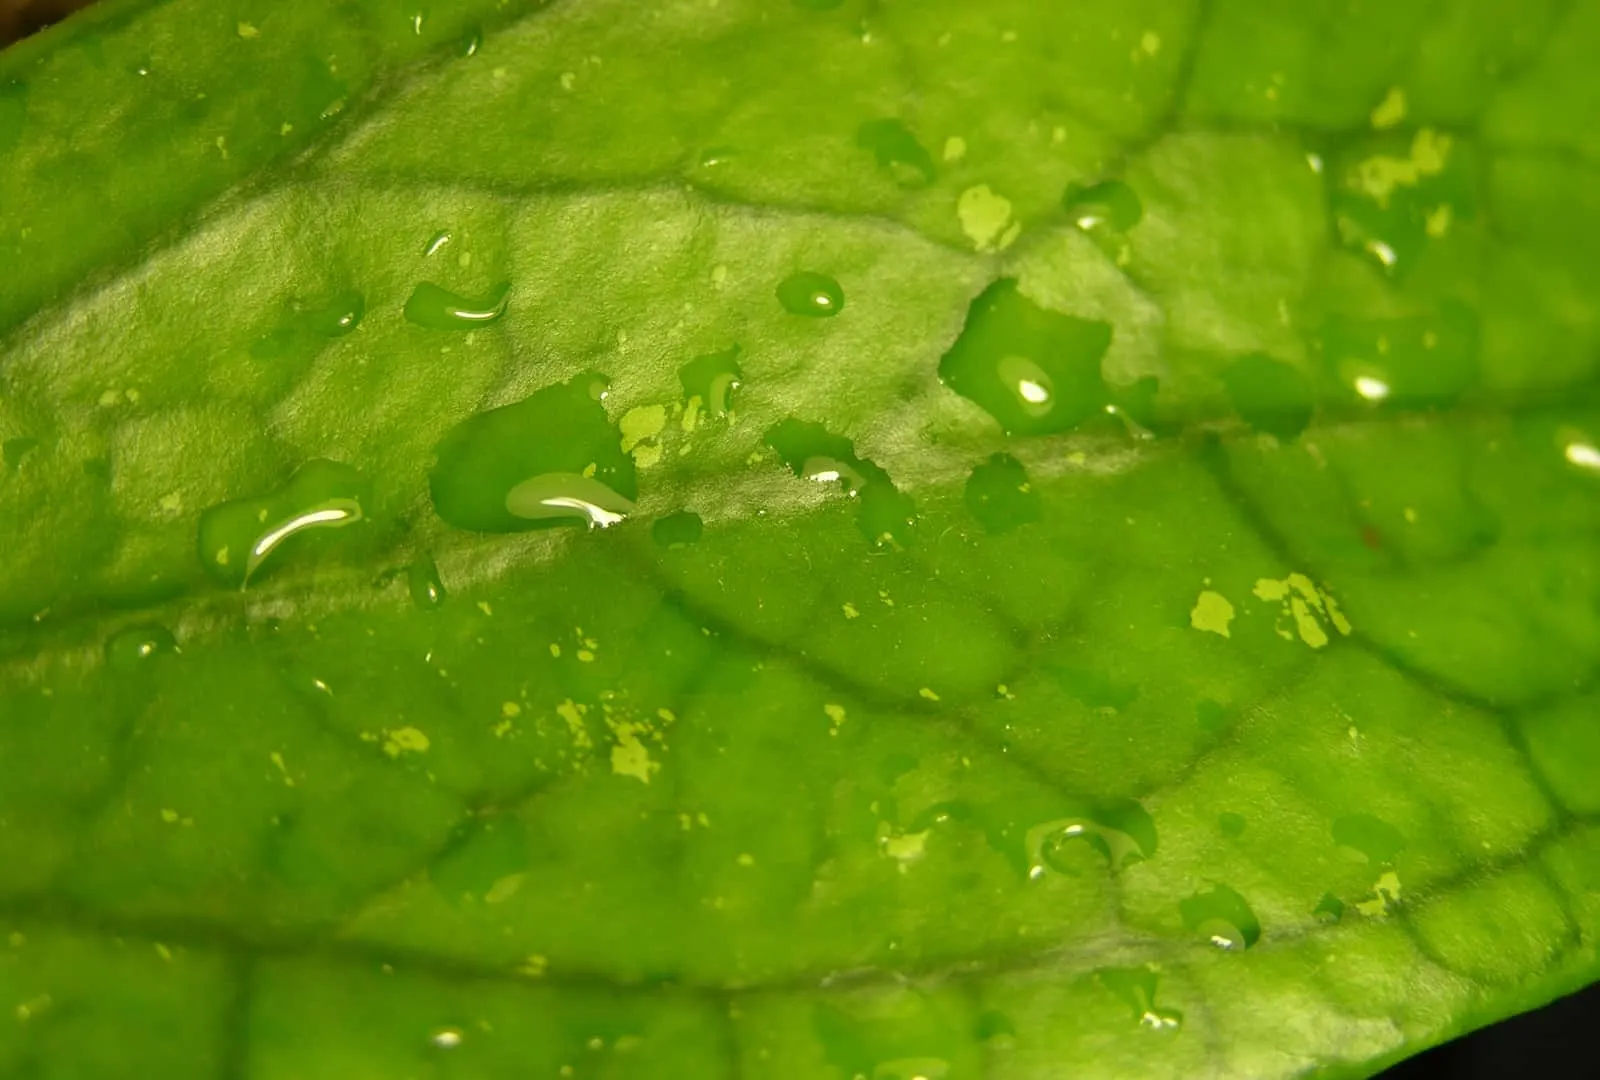 Hoya leave with water drops of different shapes